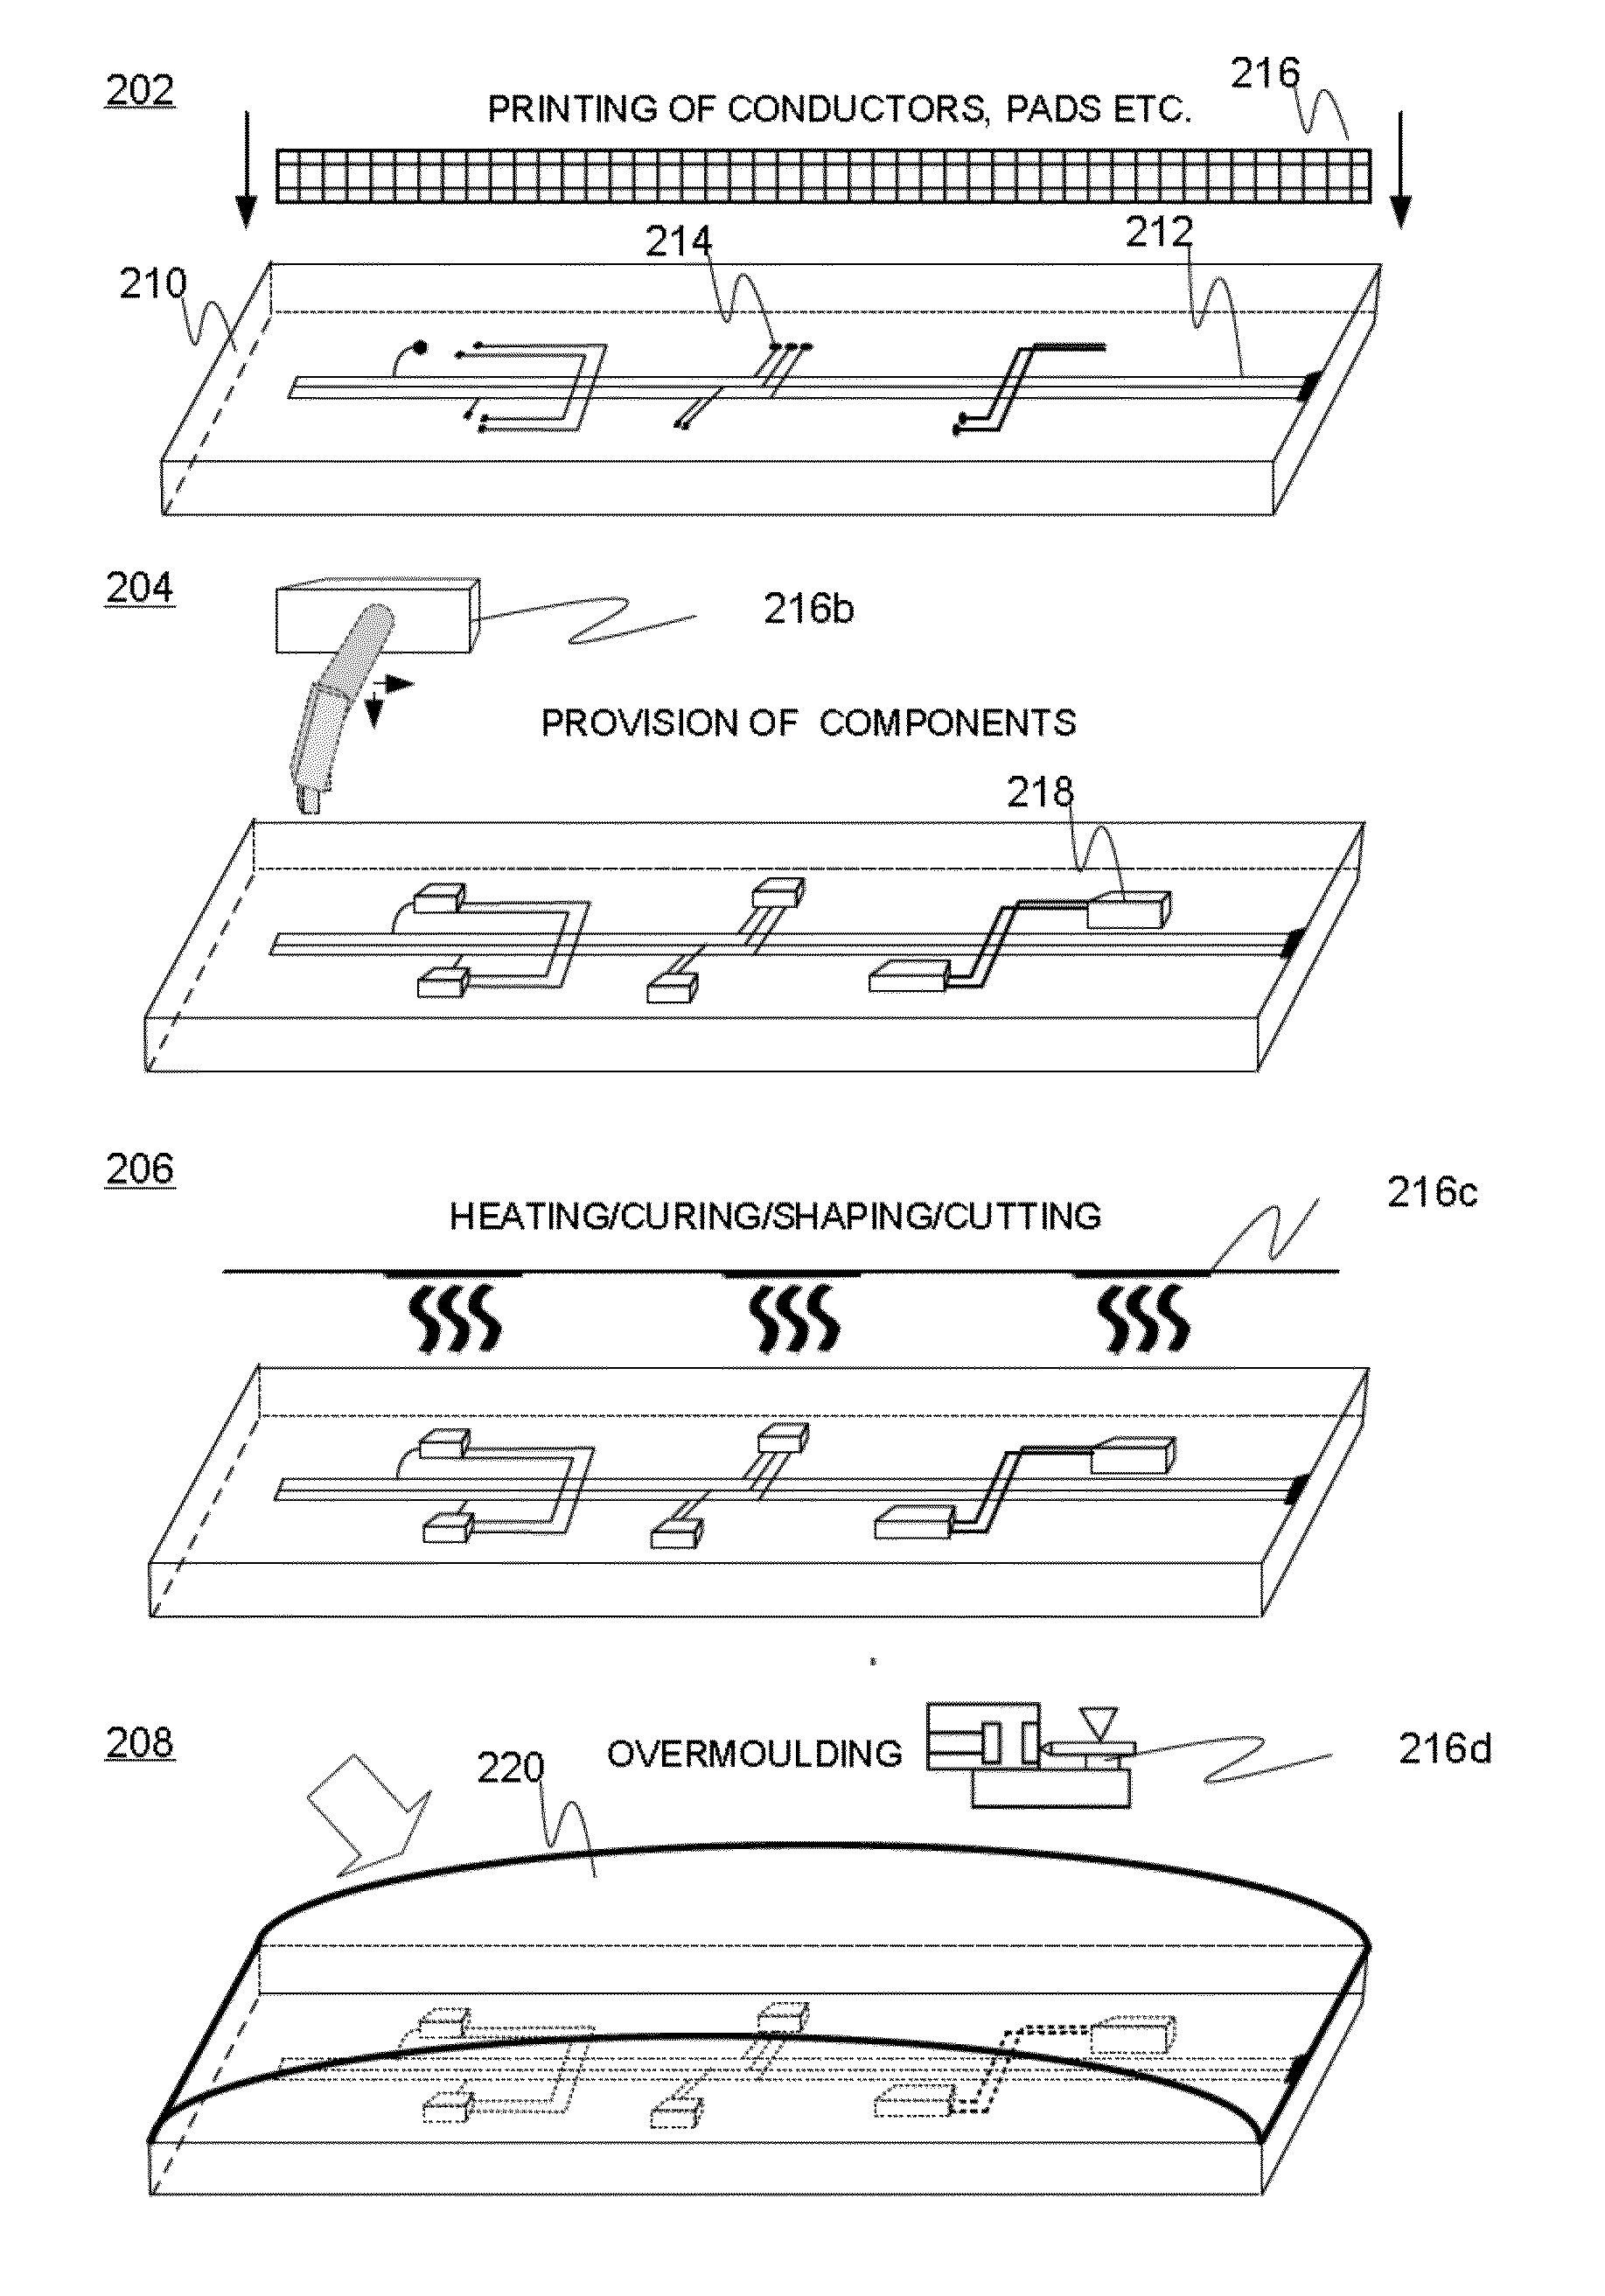 Method for manufacturing electronic products, related arrangement and product